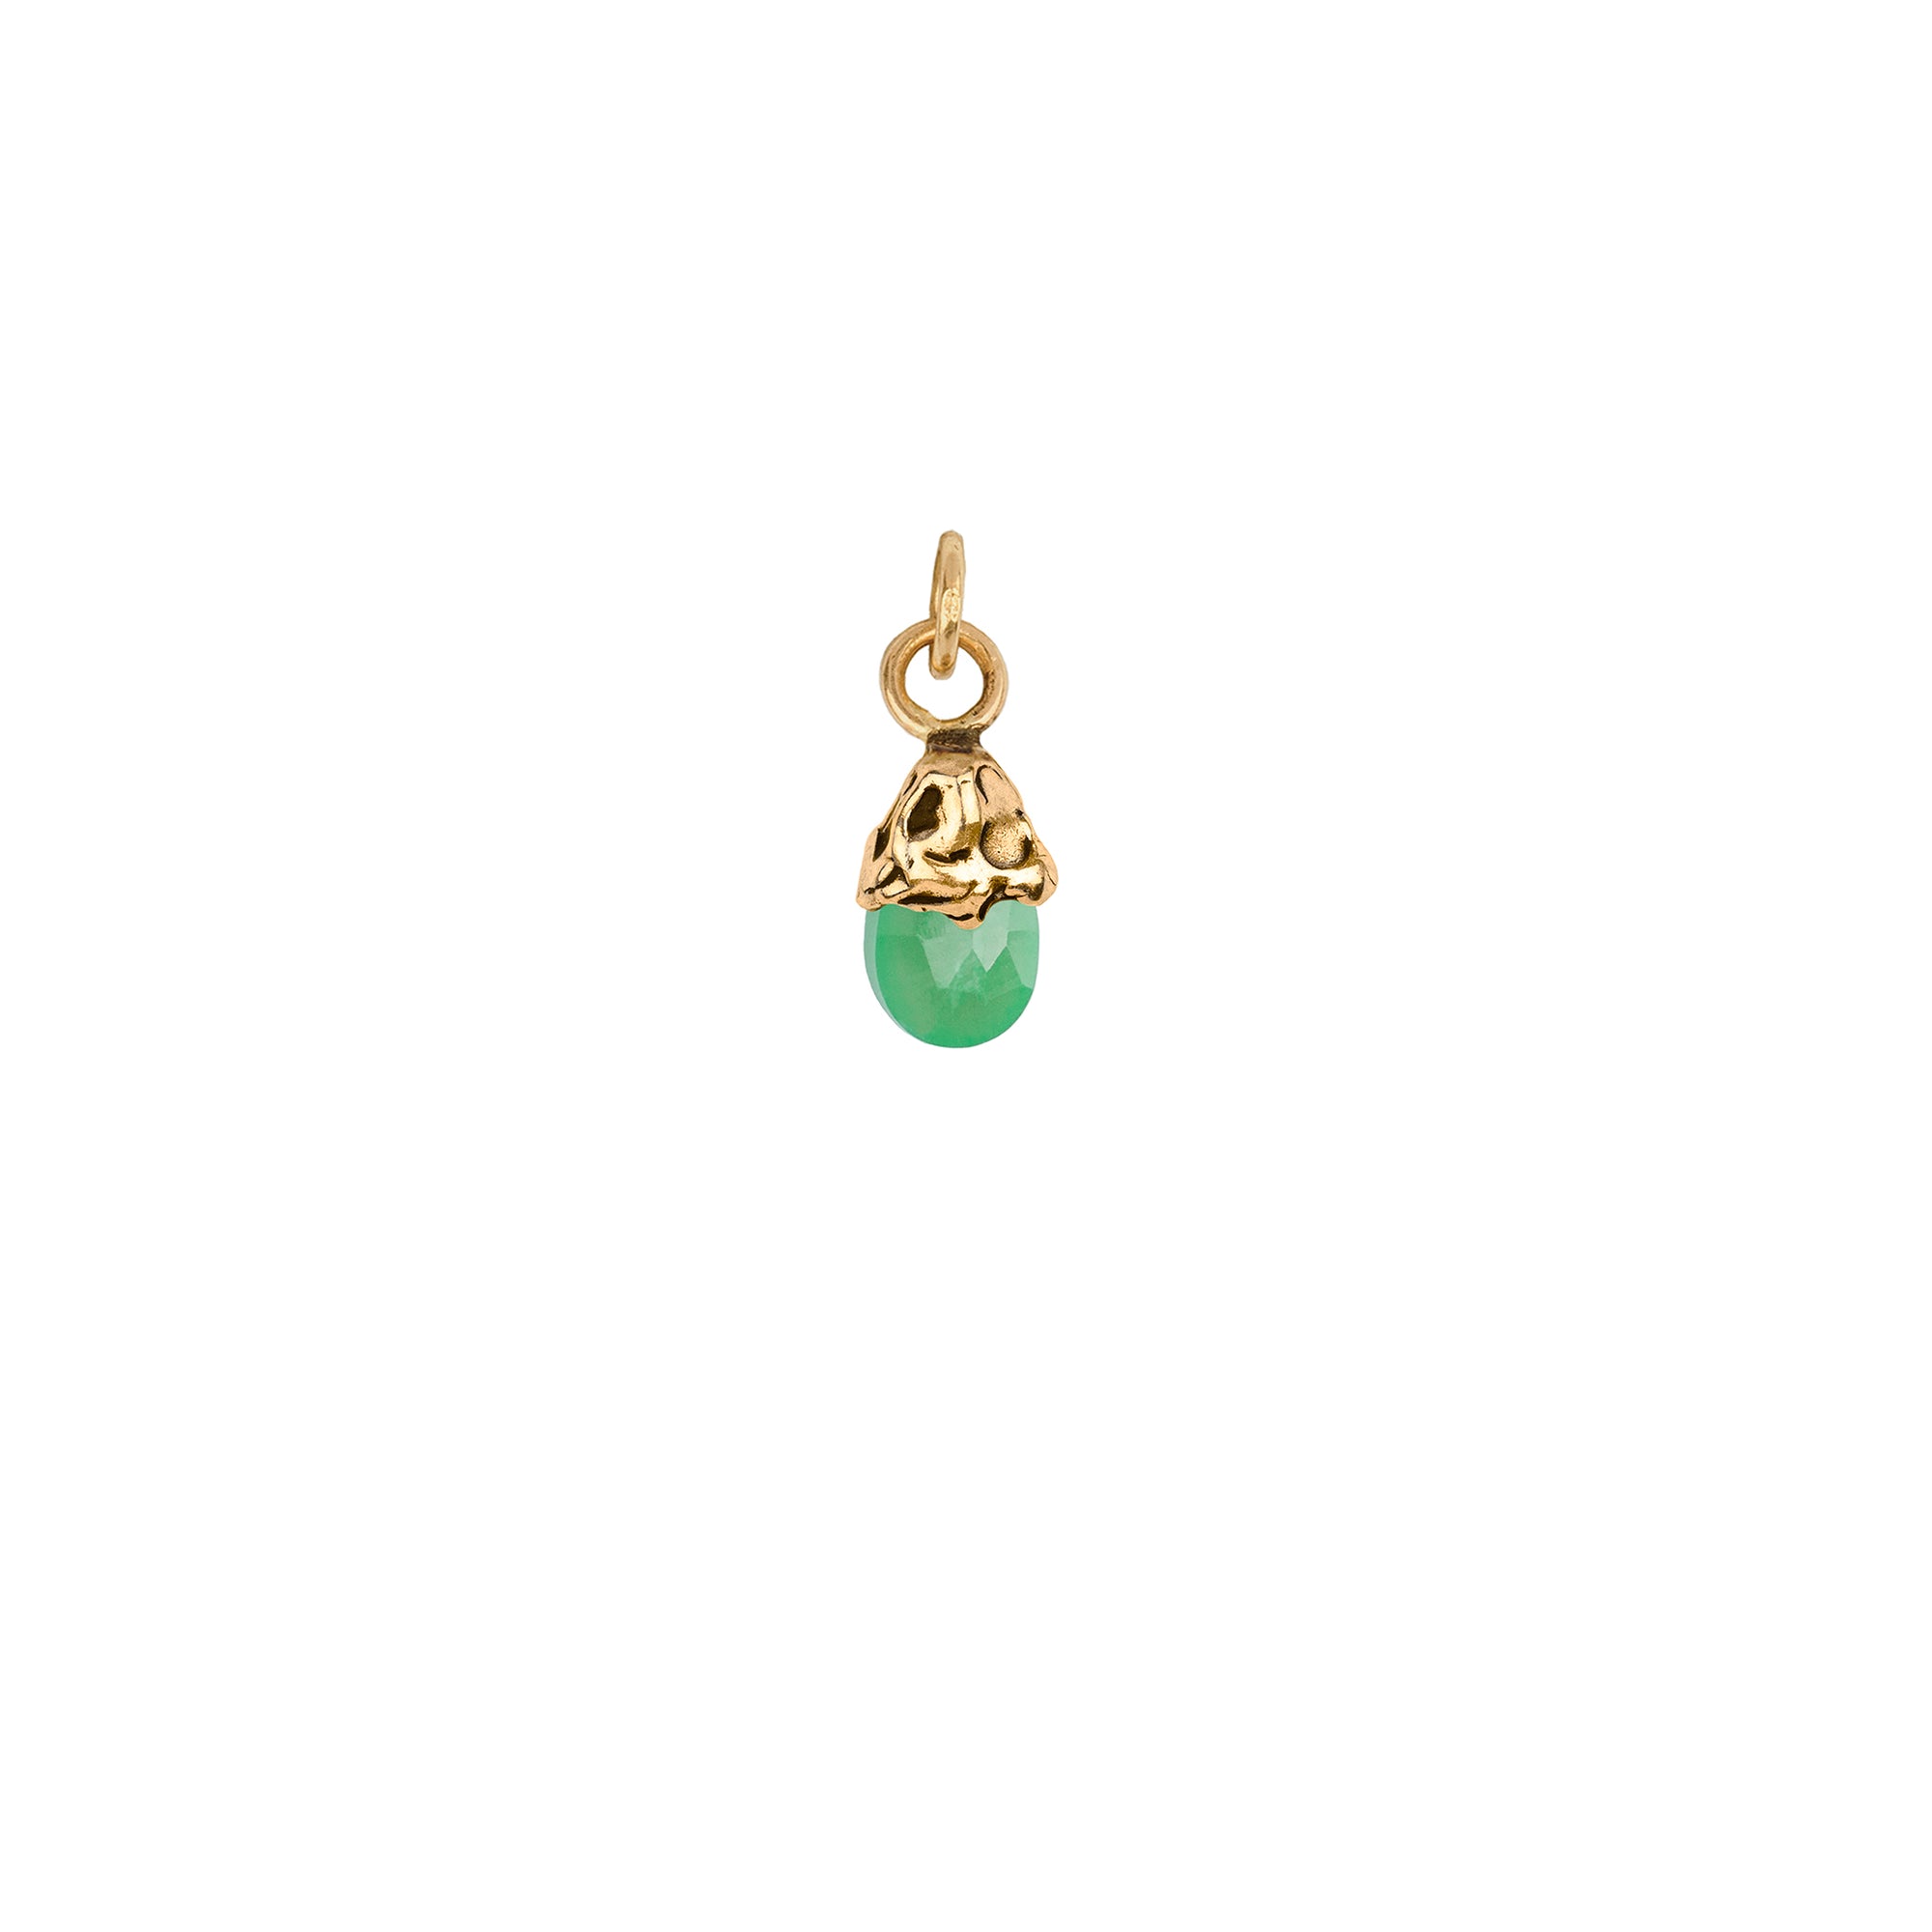 Healing 14K Gold Capped Attraction Charm